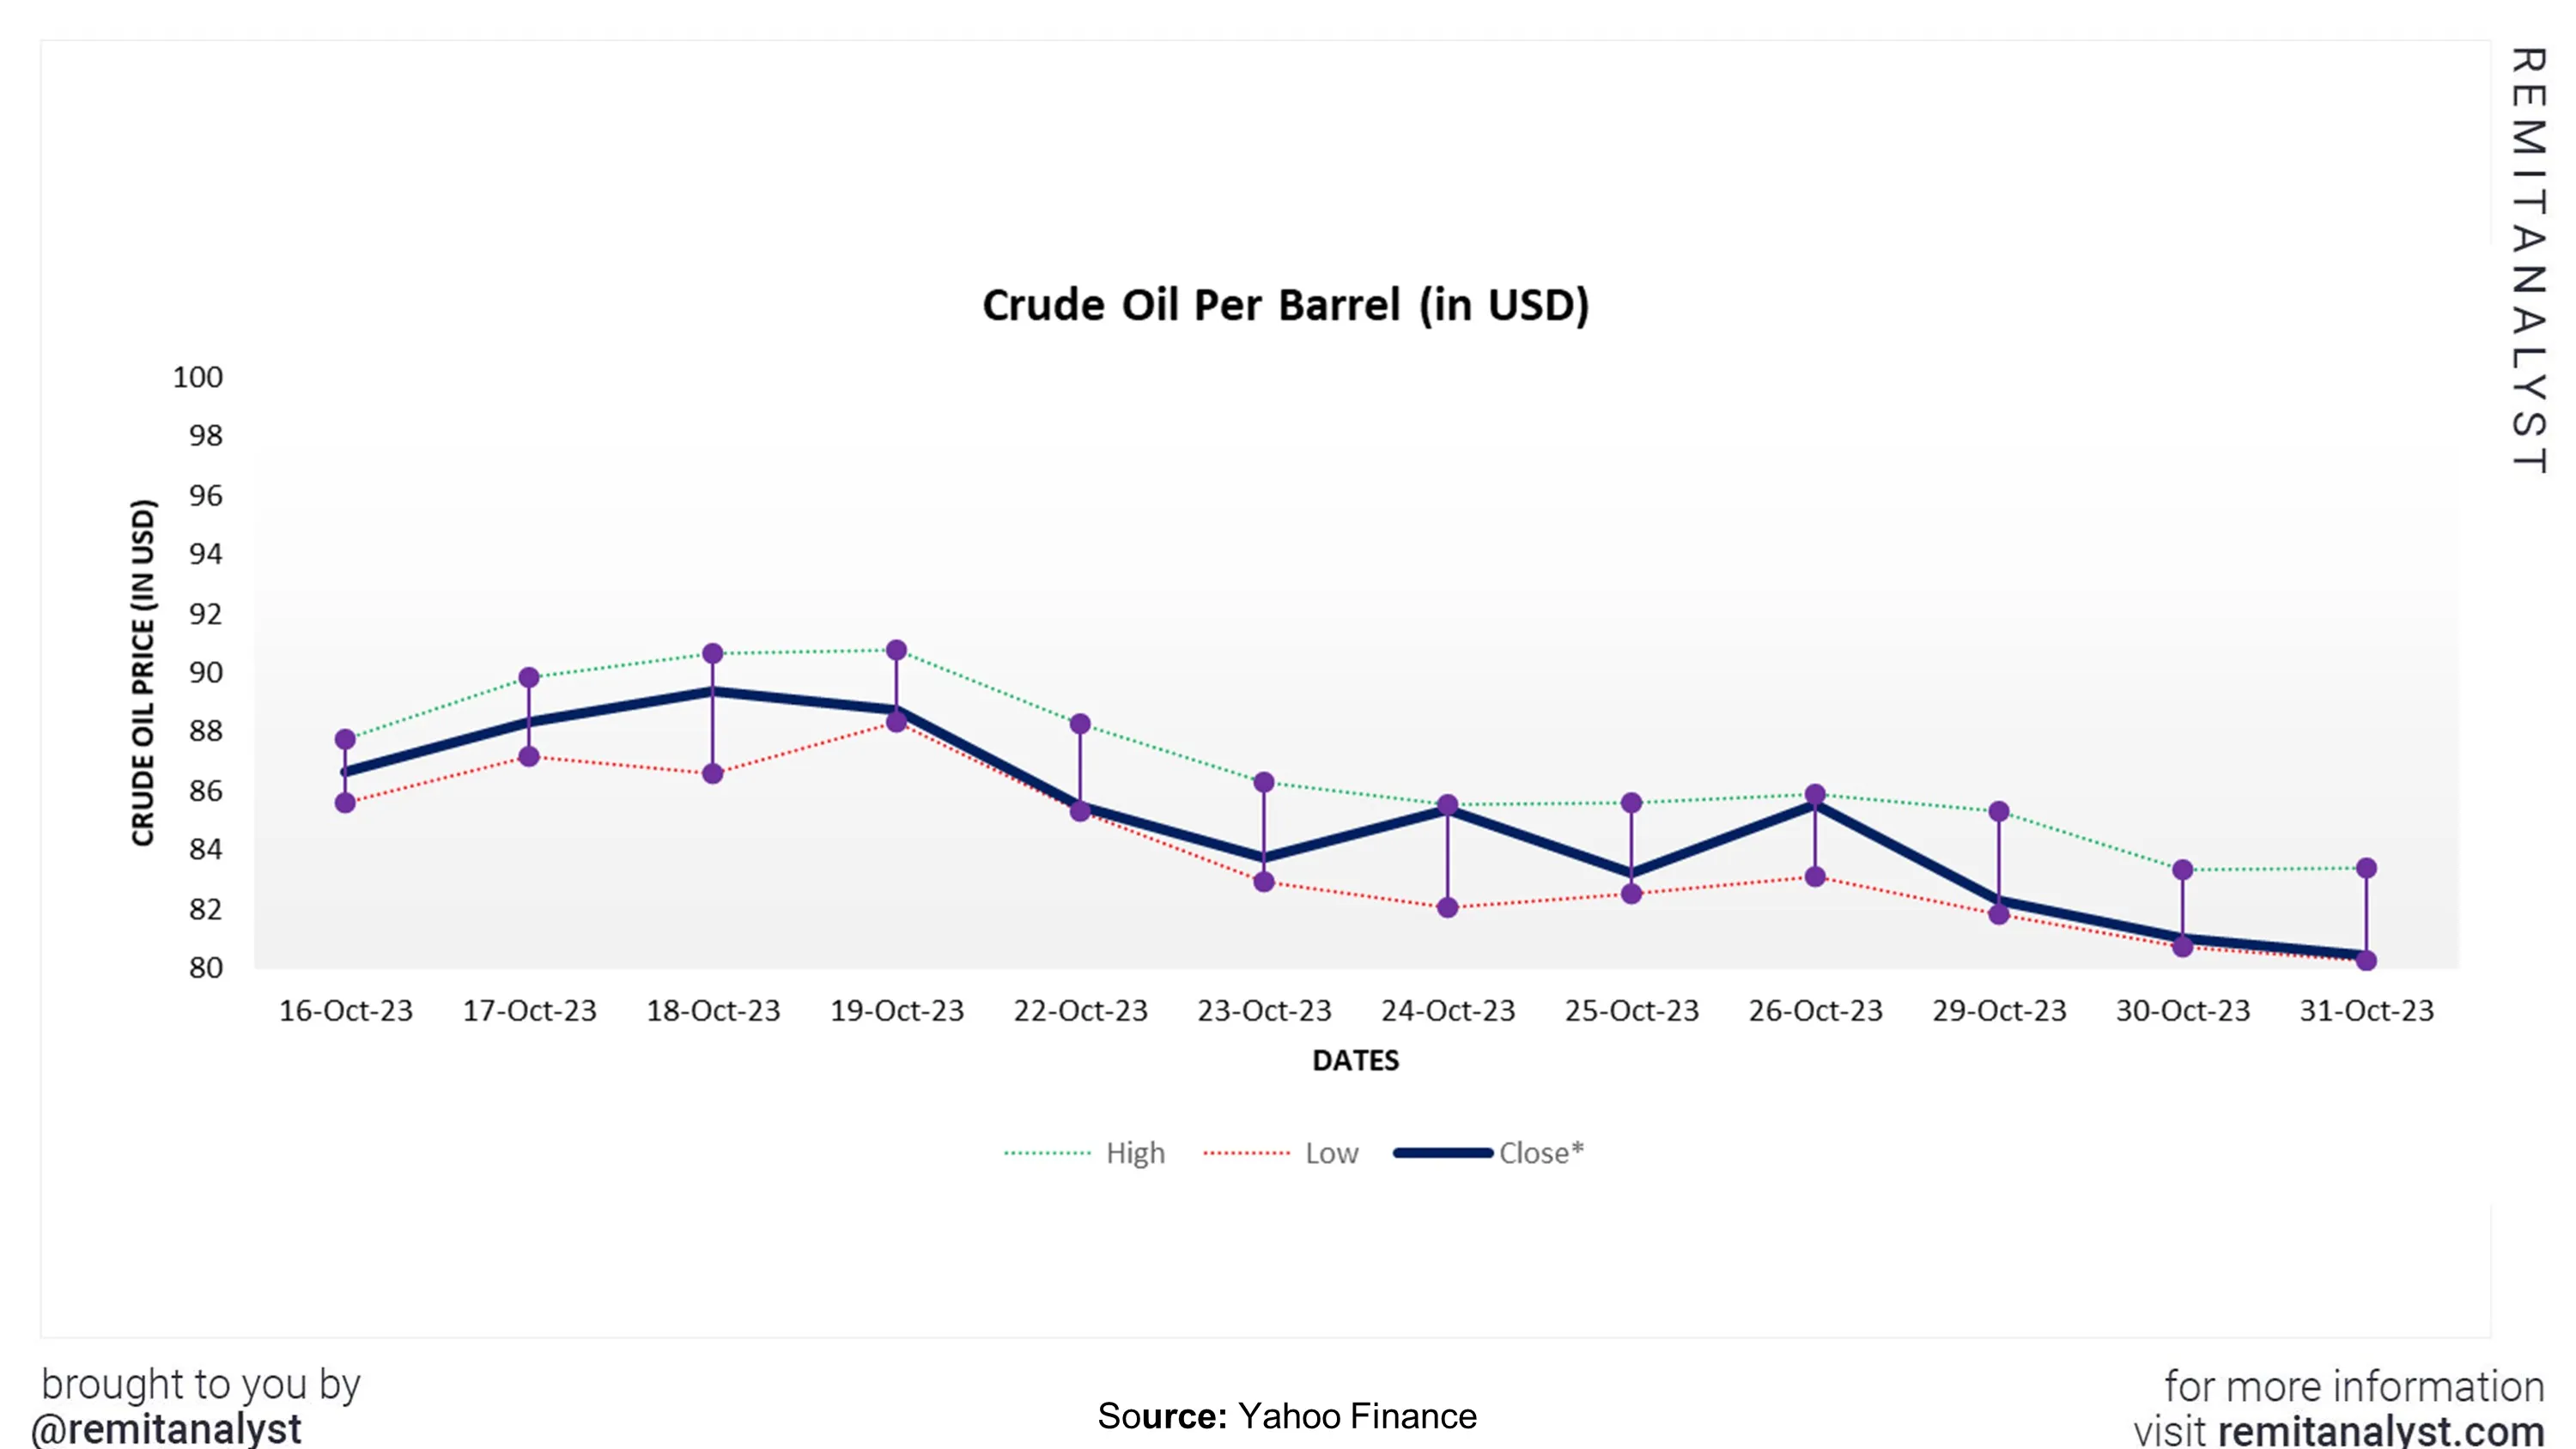 crude-oil-prices-from-16-oct-2023-to-31-oct-2023